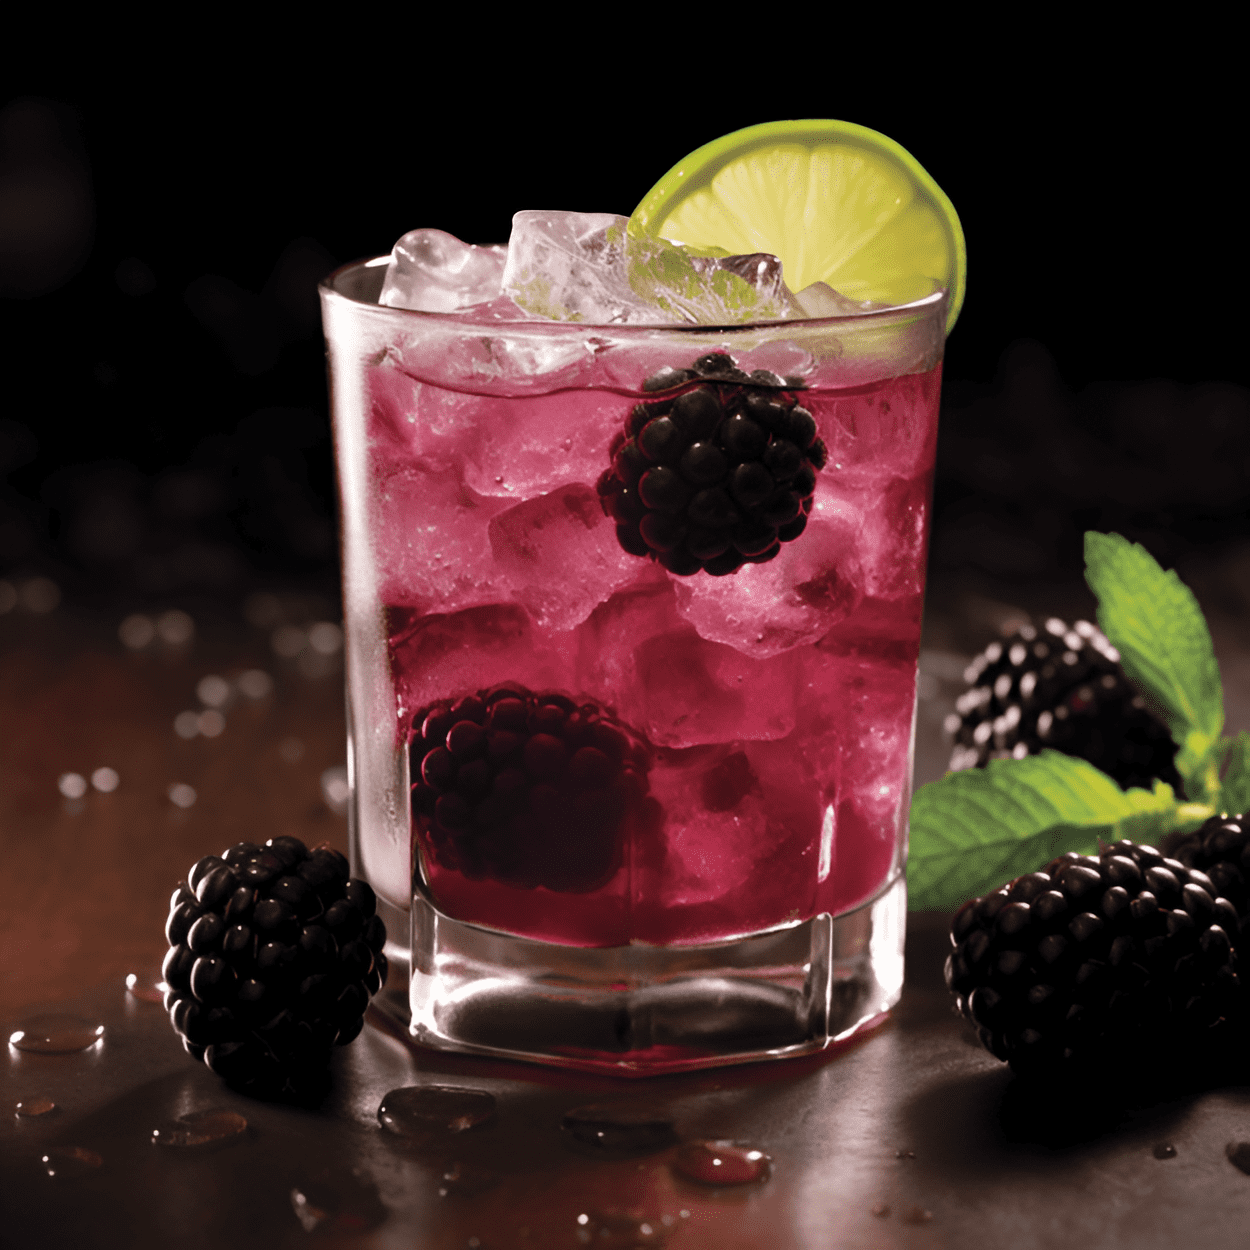 Blackberry Daiquiri Cocktail Recipe - The Blackberry Daiquiri is a delightful blend of sweet and tart, with the blackberries providing a fruity freshness that is perfectly balanced by the sharpness of the lime juice. The rum adds a warm, smooth undertone that rounds out the flavors beautifully.